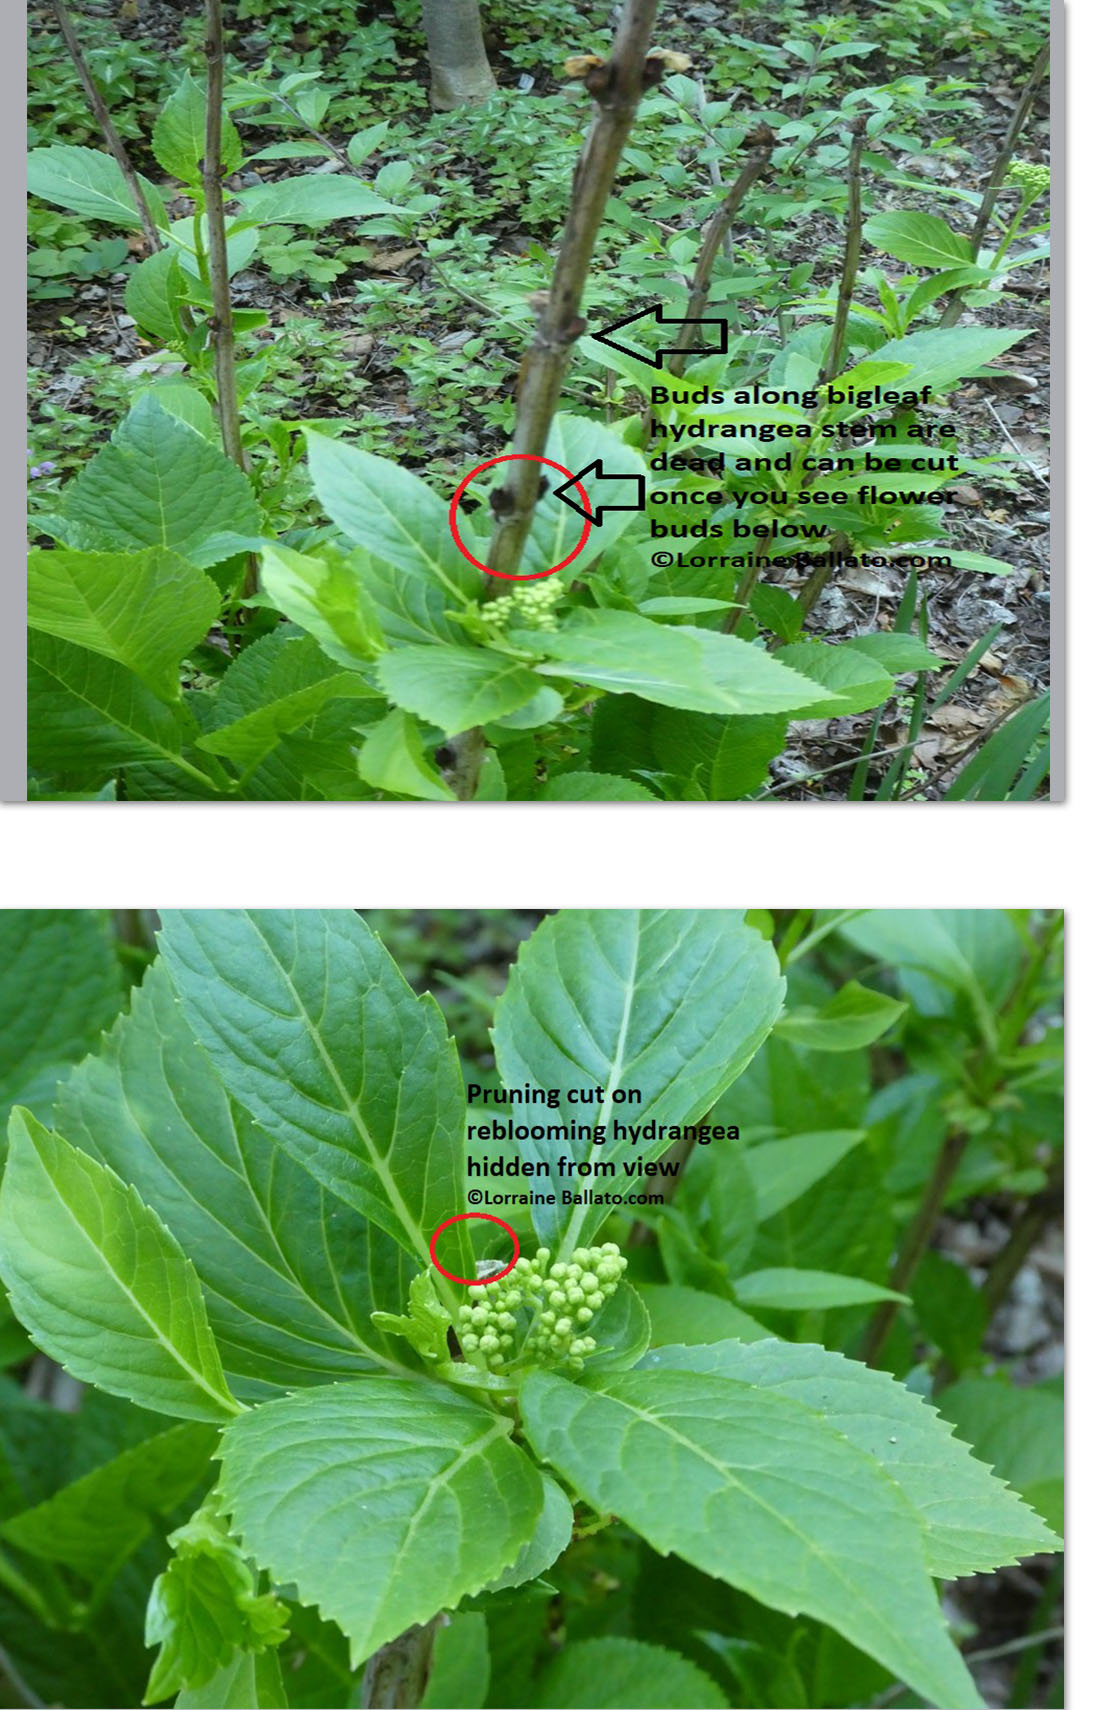 Collage showing when to prune dead tips from hydrangeas